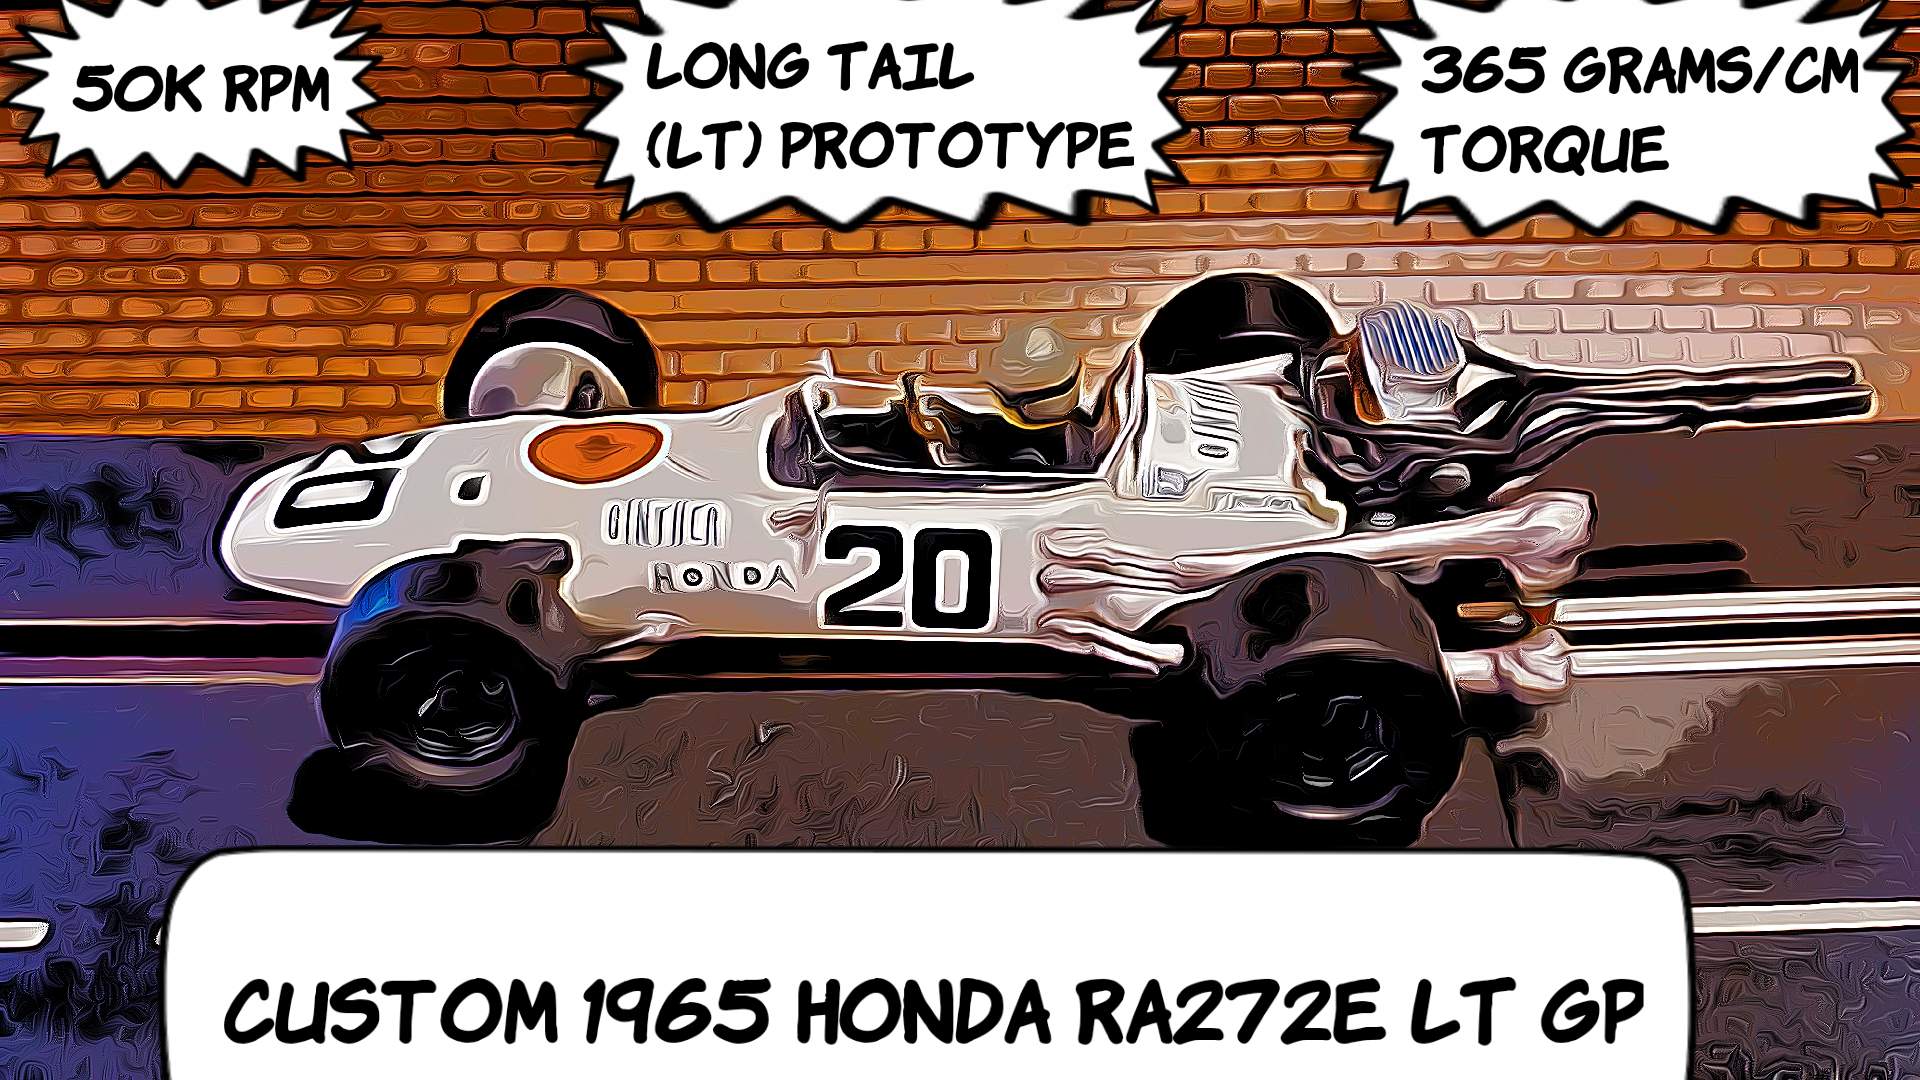 * SALE, Save $60 off vs our $279.99 Ebay Store * Honda RA272E LT (Long Tail) Richie Ginther Prototype Slot Car #20 1:24 Scale